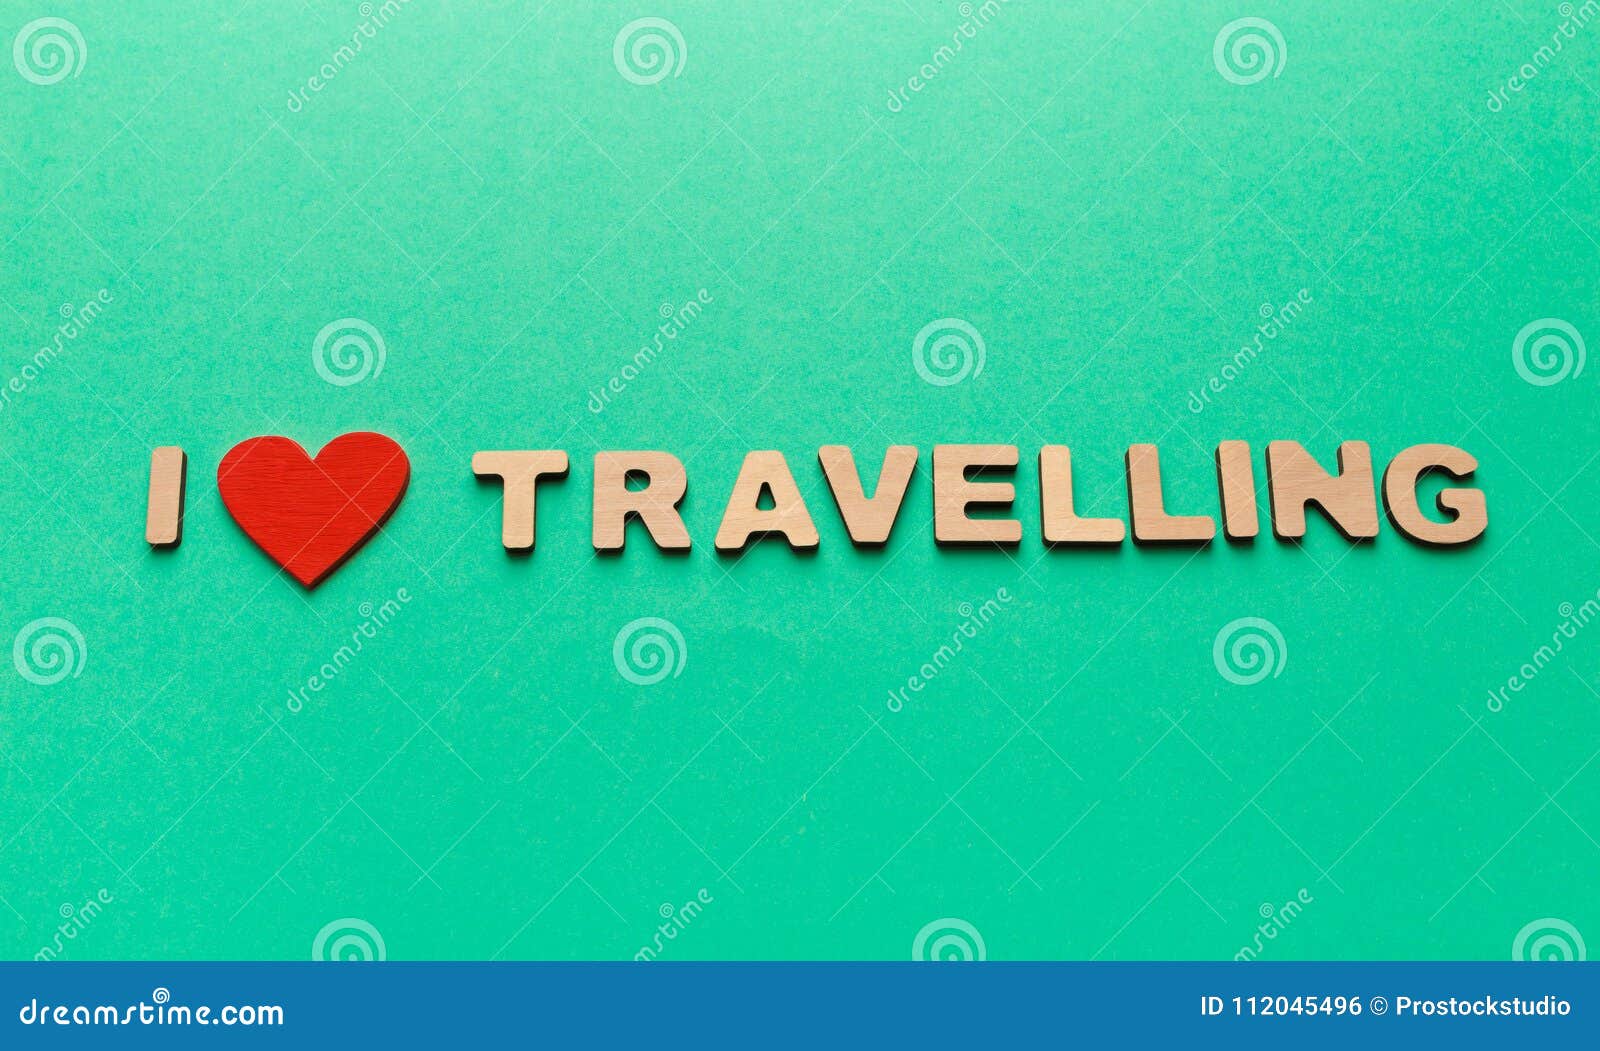 i love travelling an